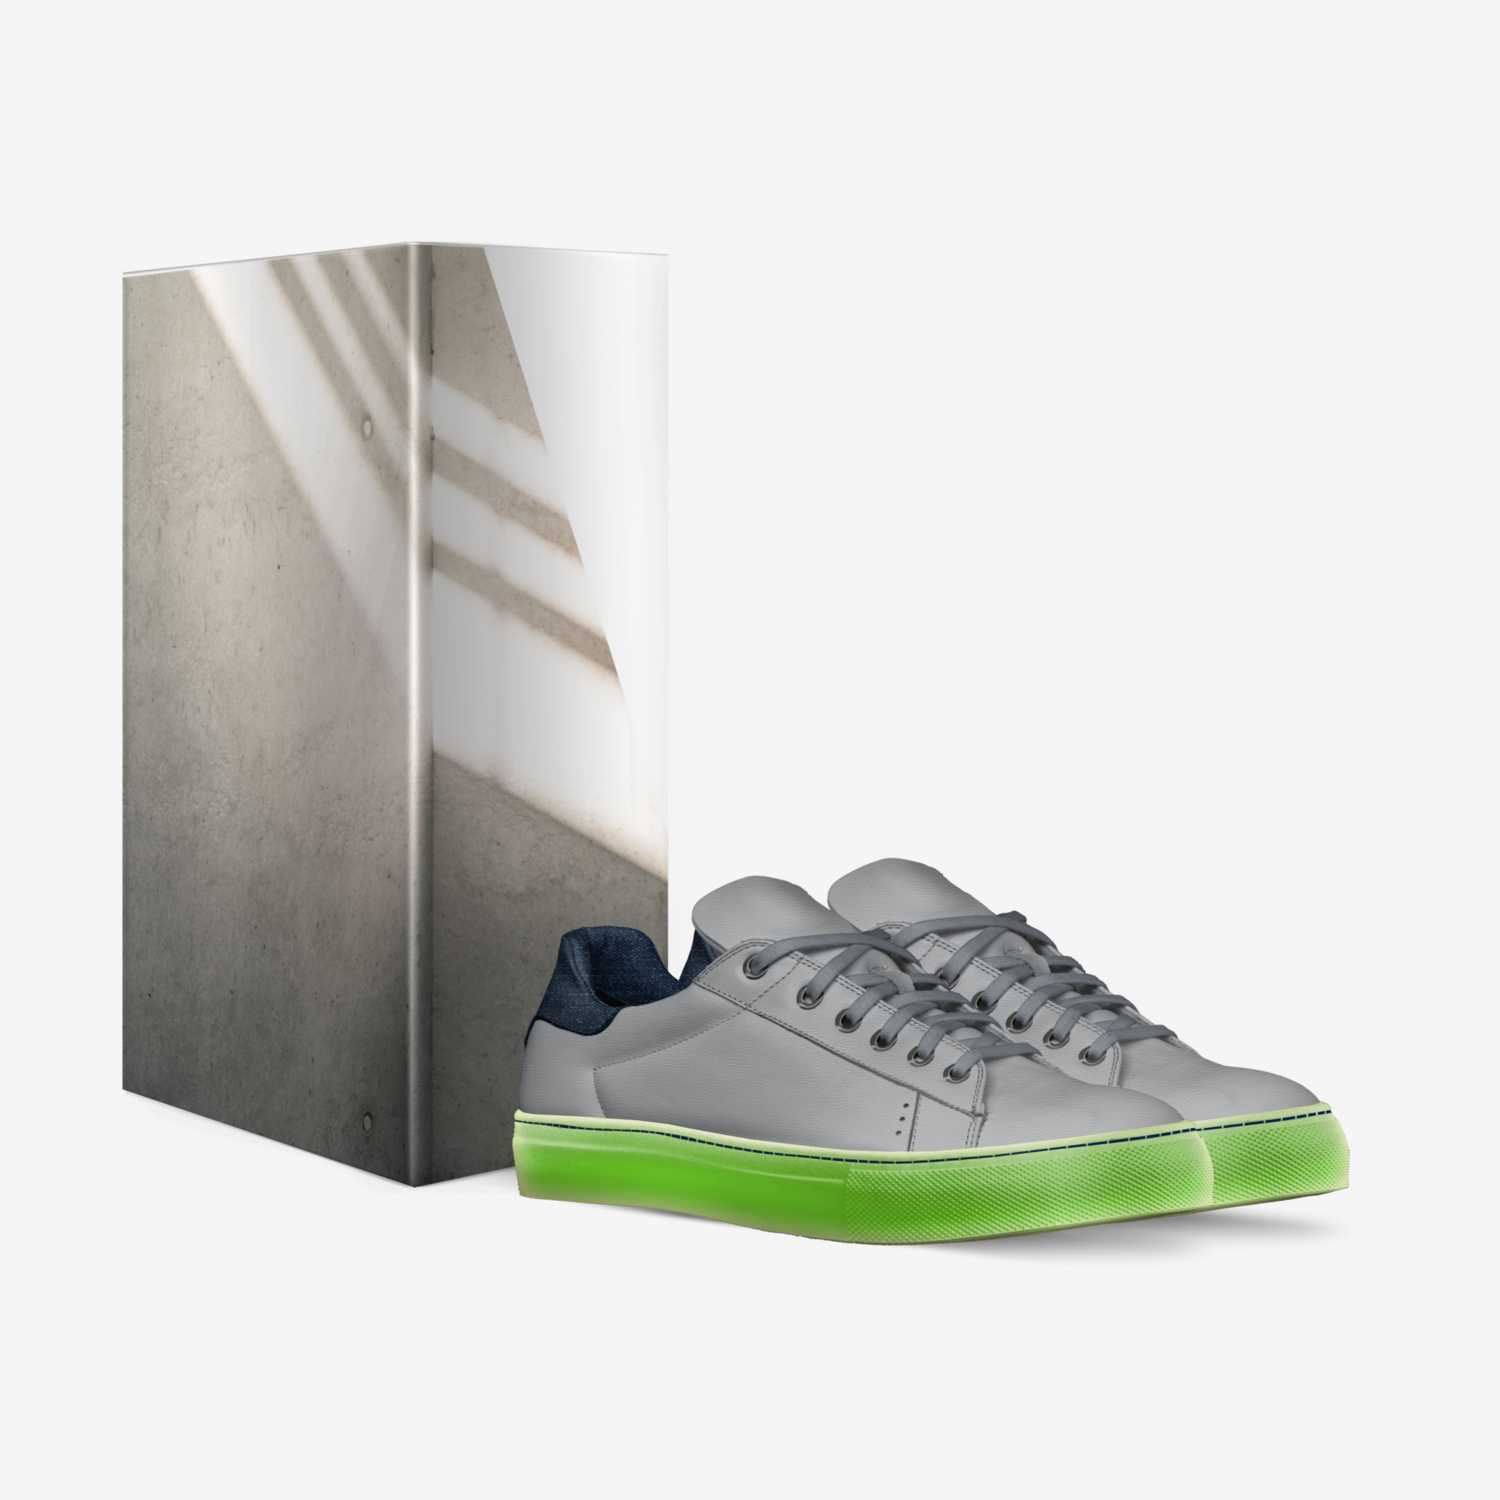 ConCreat Lo custom made in Italy shoes by Ben Daniels | Box view